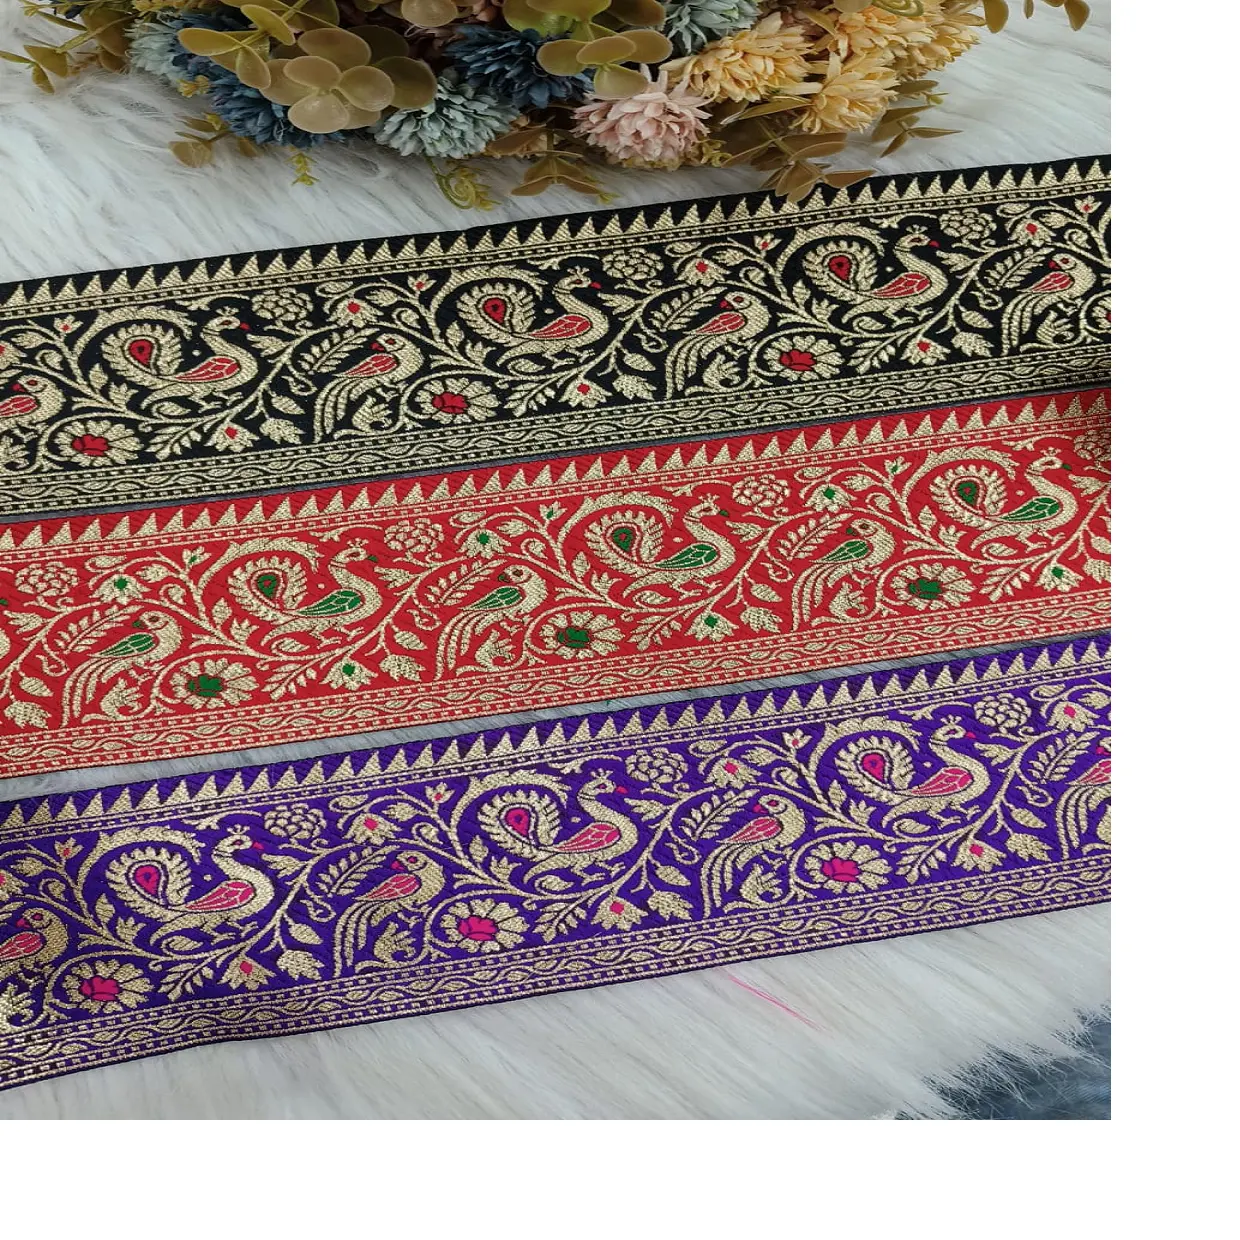 custom made machine embroidered laces in paisley design for wedding dresses in red & black and blue colours for resale.